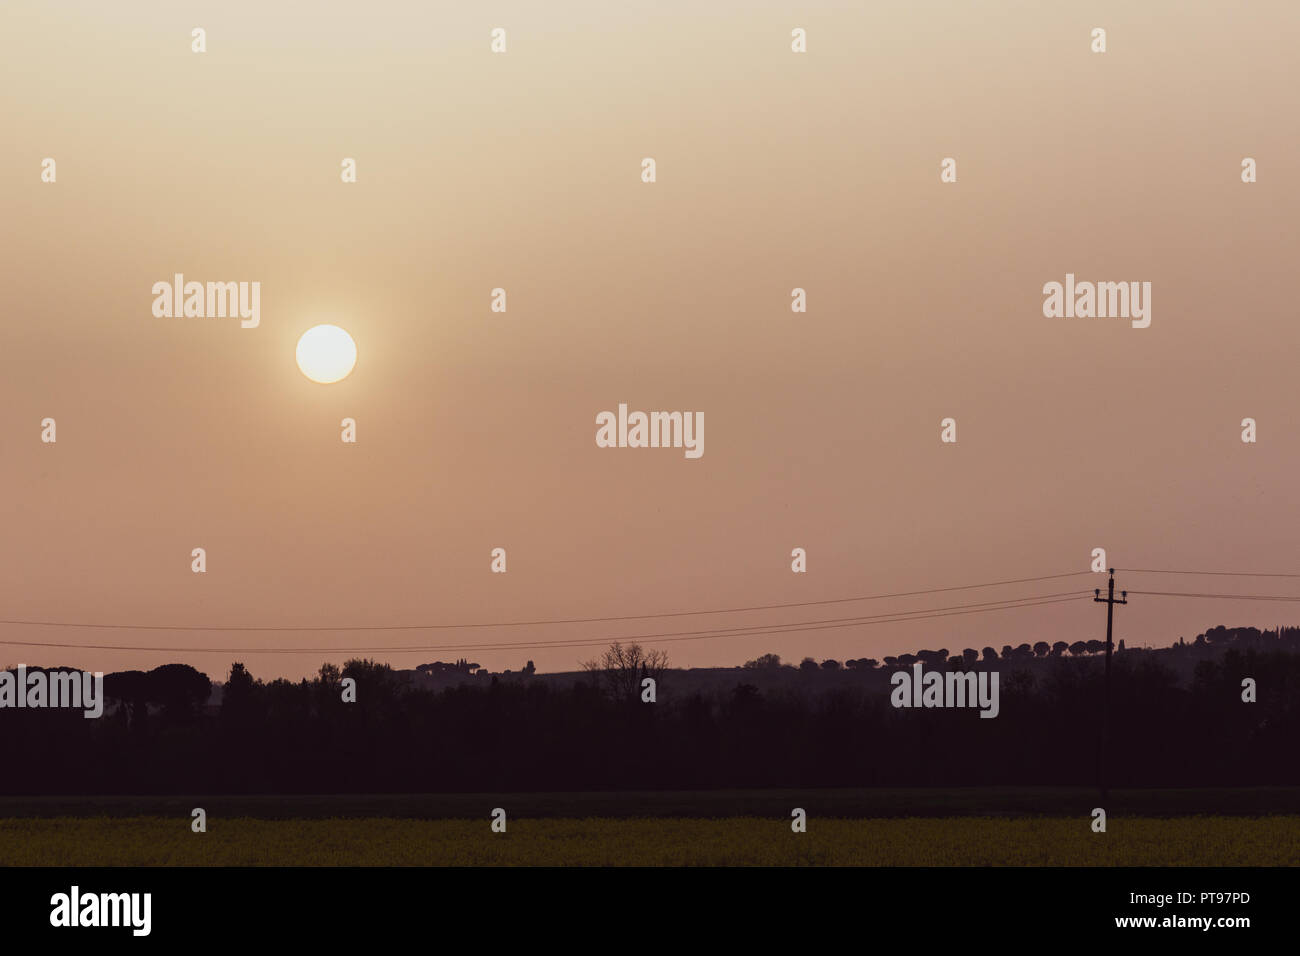 Sunset with sand suspended in the atmosphere, coluring the sky red, over some trees silhouettes and power lines Stock Photo